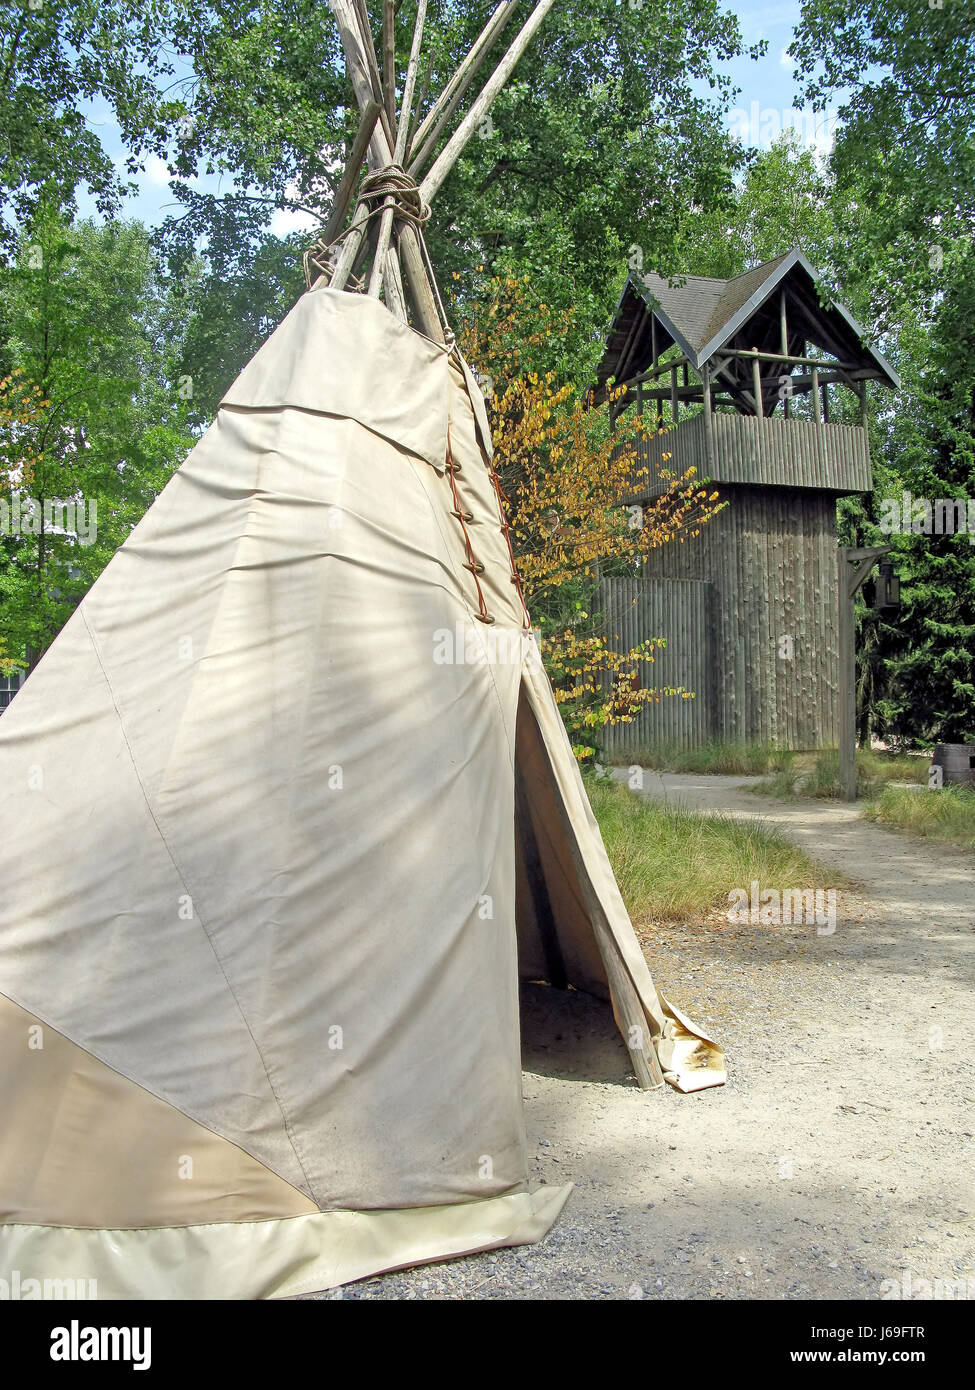 indian teepee fort tipi teepee indian tipi tent american wigwam native  house Stock Photo - Alamy